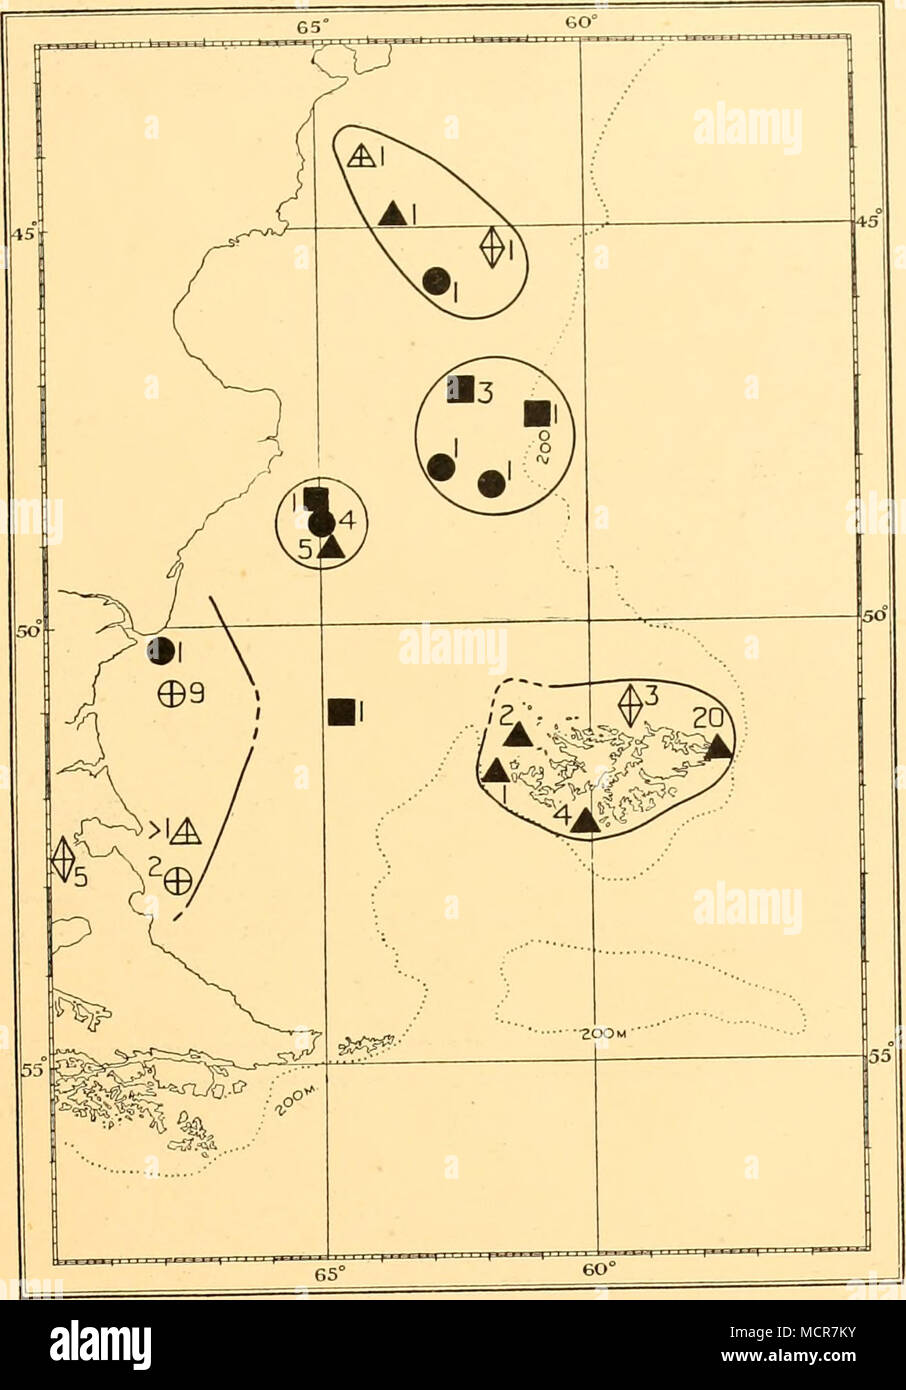 . Fie ,2 Distribution of Agonopsis chiloensis: positive records only, roughly contoured to show their localization in differerit seLns'. oLonds, springfcircles, summer; triangles, autumn; squares, winter. Solid symbols represent captures m Trawl + accessory nets'; cross symbols with 'Other gear'. LIPARIDAE Careproctus falklandica (Lonnberg). Six specimens of this fish were trawled at St. WS89 off Cape Virgins in April 1927. It was previously known only from the Falkland Islands and the Burdwood Bank. This suggests a distribution similar to that of Neophrynkhthys, which it resembles m havmg a s Stock Photo